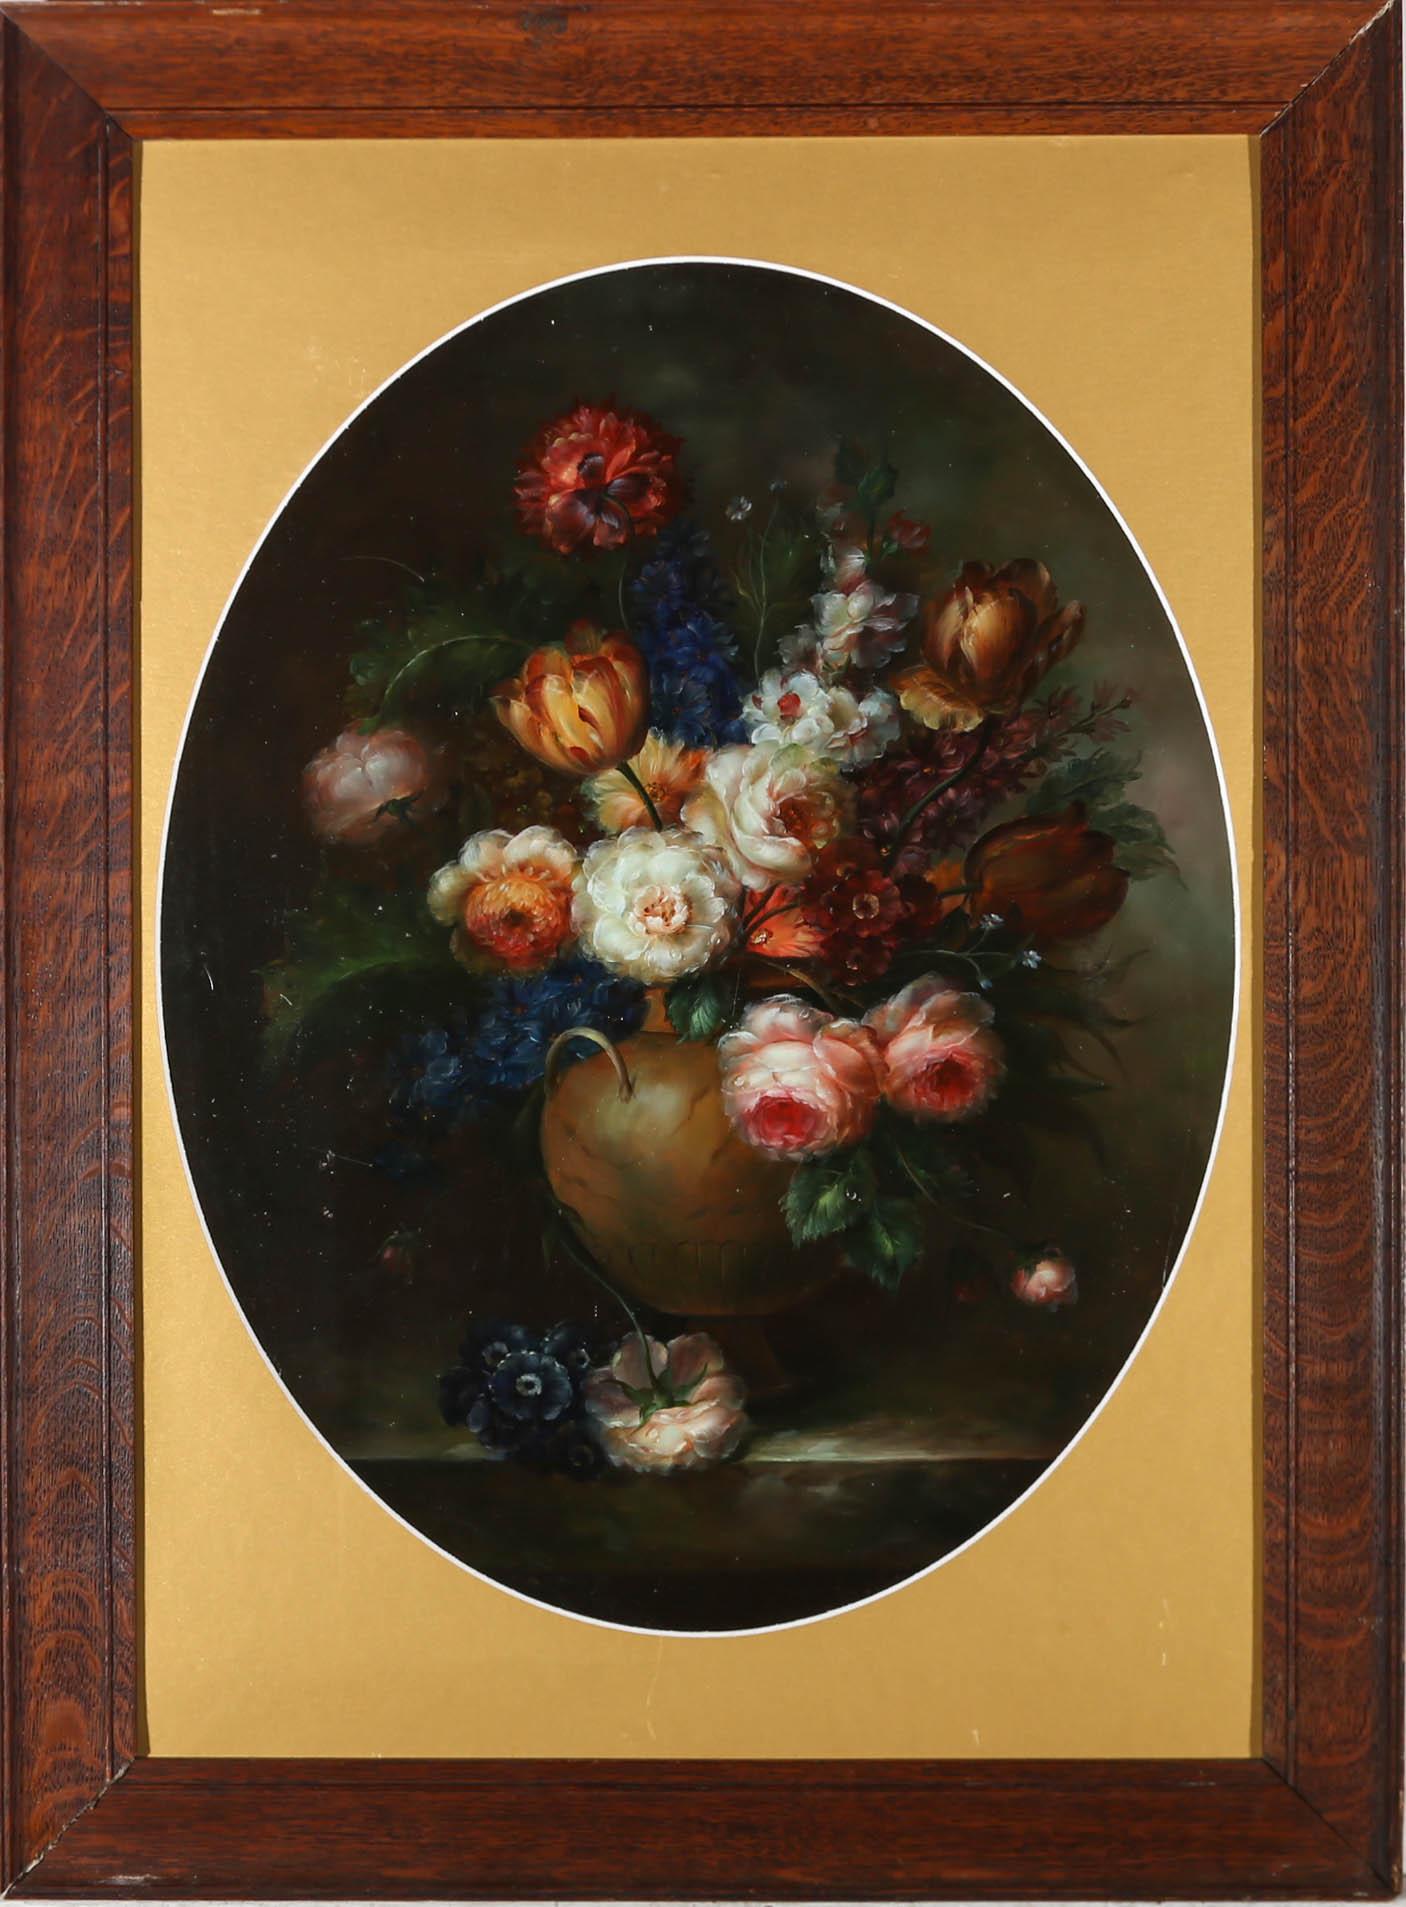 A well composed and delicately painted still life of Tulips, Peonies and Delphiniums, extravagantly displayed in a smooth stoneware urn. Unsigned. Elegantly presented in a dark wood frame with a gilt oval mount. On panel. 